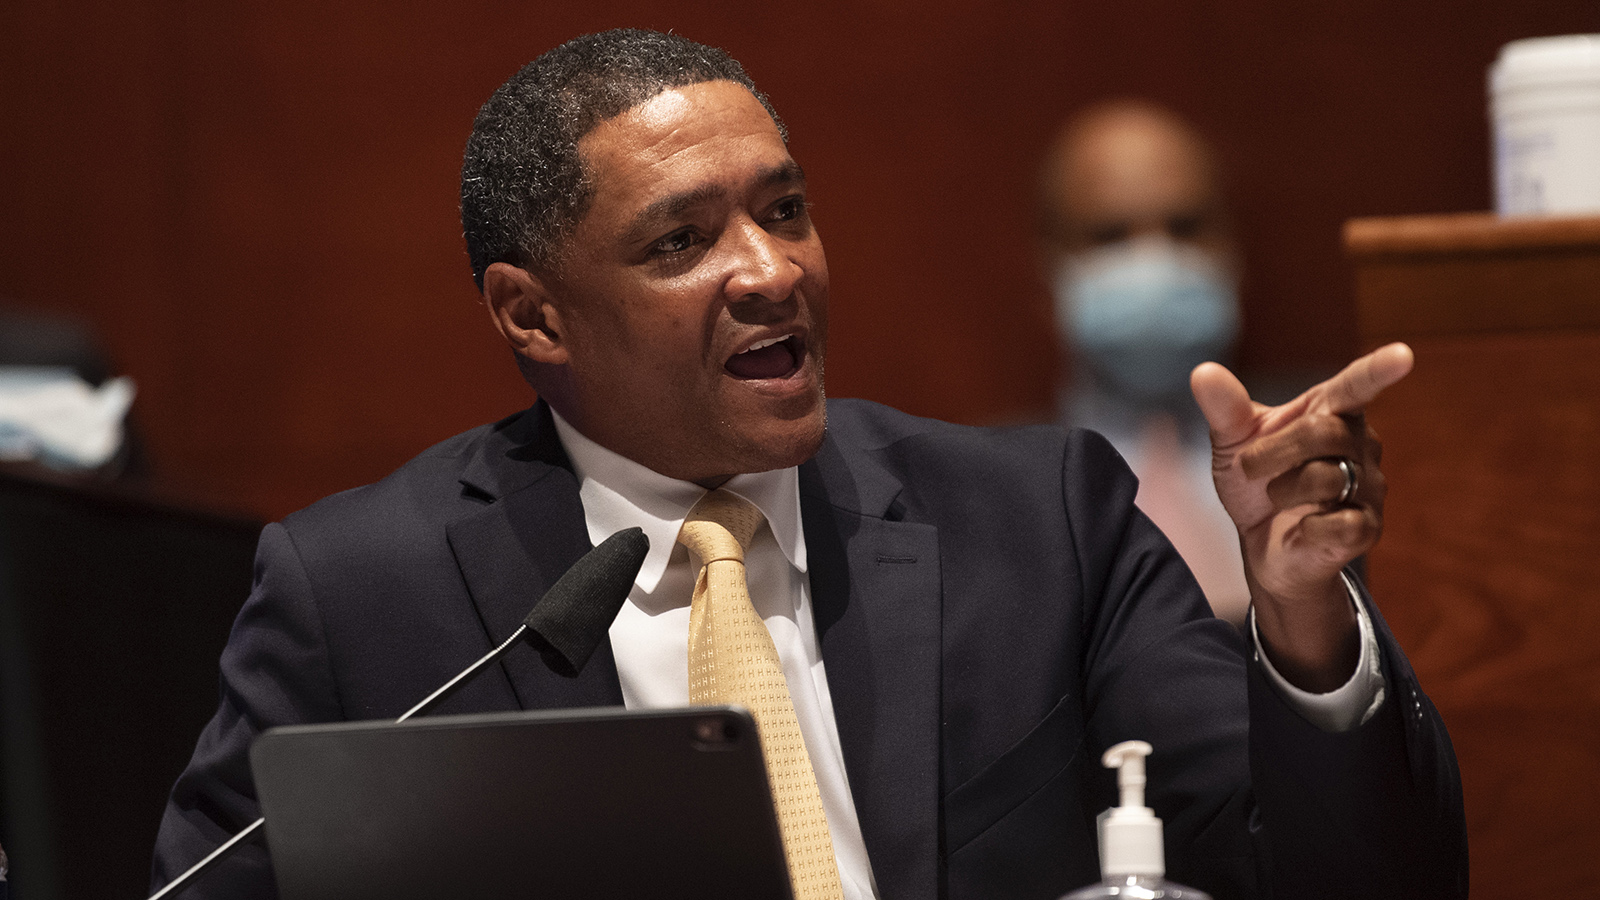 Rep. Cedric Richmond delivers remarks during a House Judiciary Committee markup of H.R. 7120, the "George Floyd Justice in Policing Act of 2020," on Capitol Hill on June 17 in Washington.